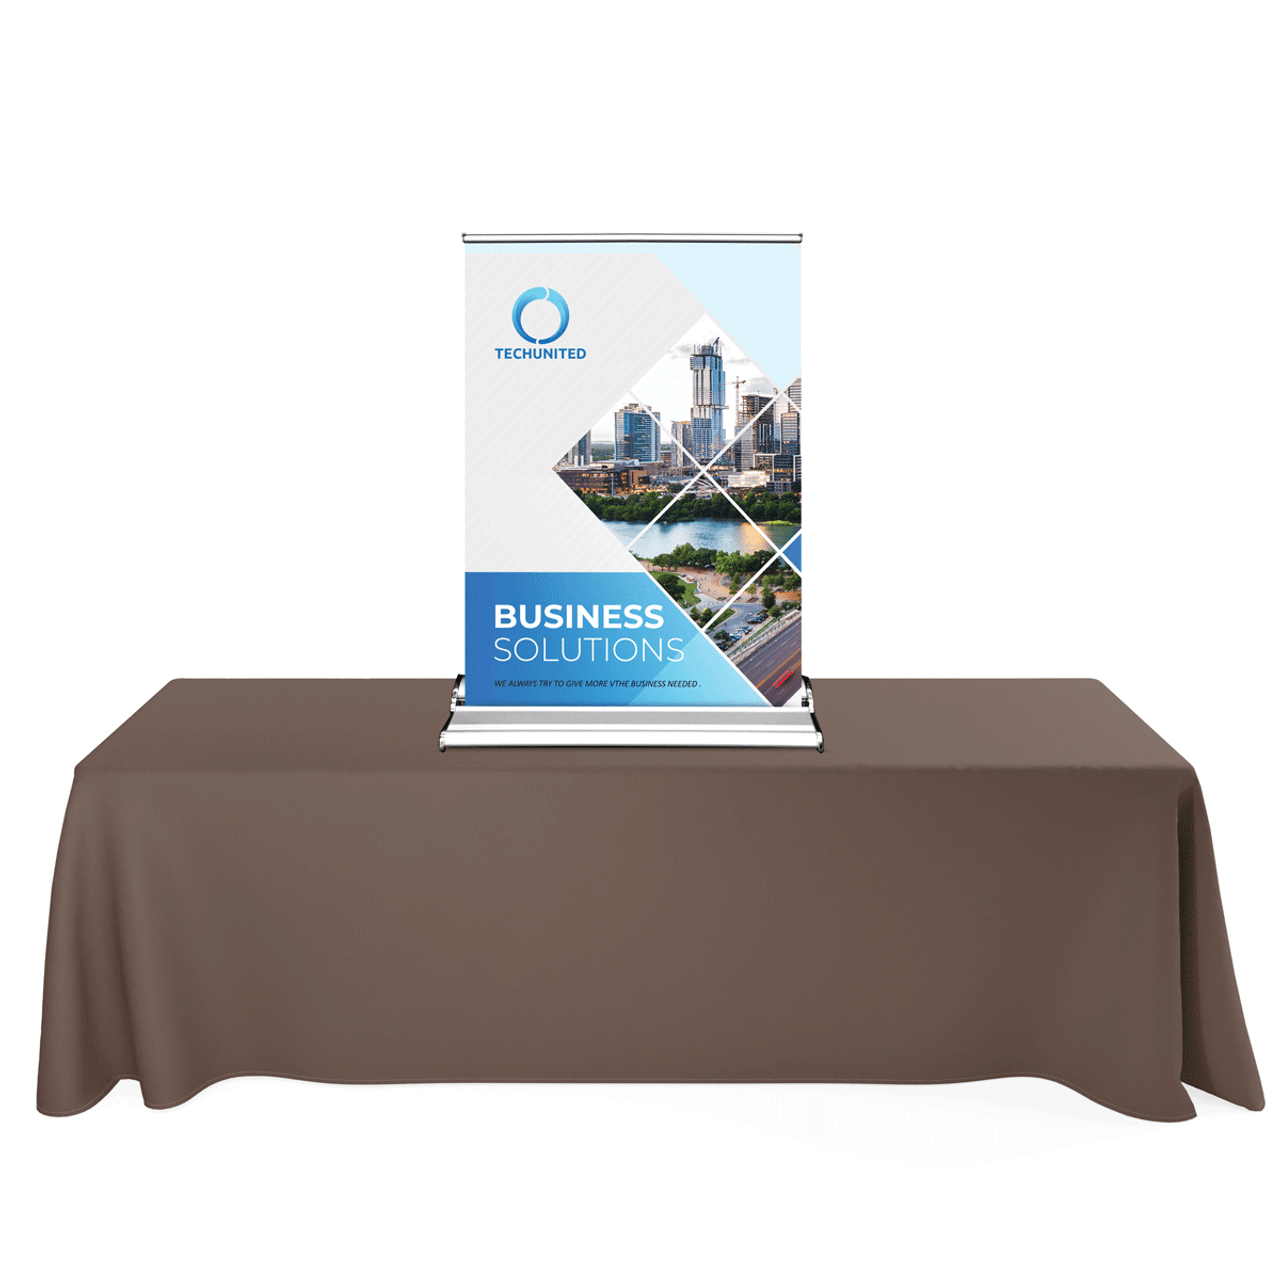 24" Banner Stand | Included | ARTalks Display